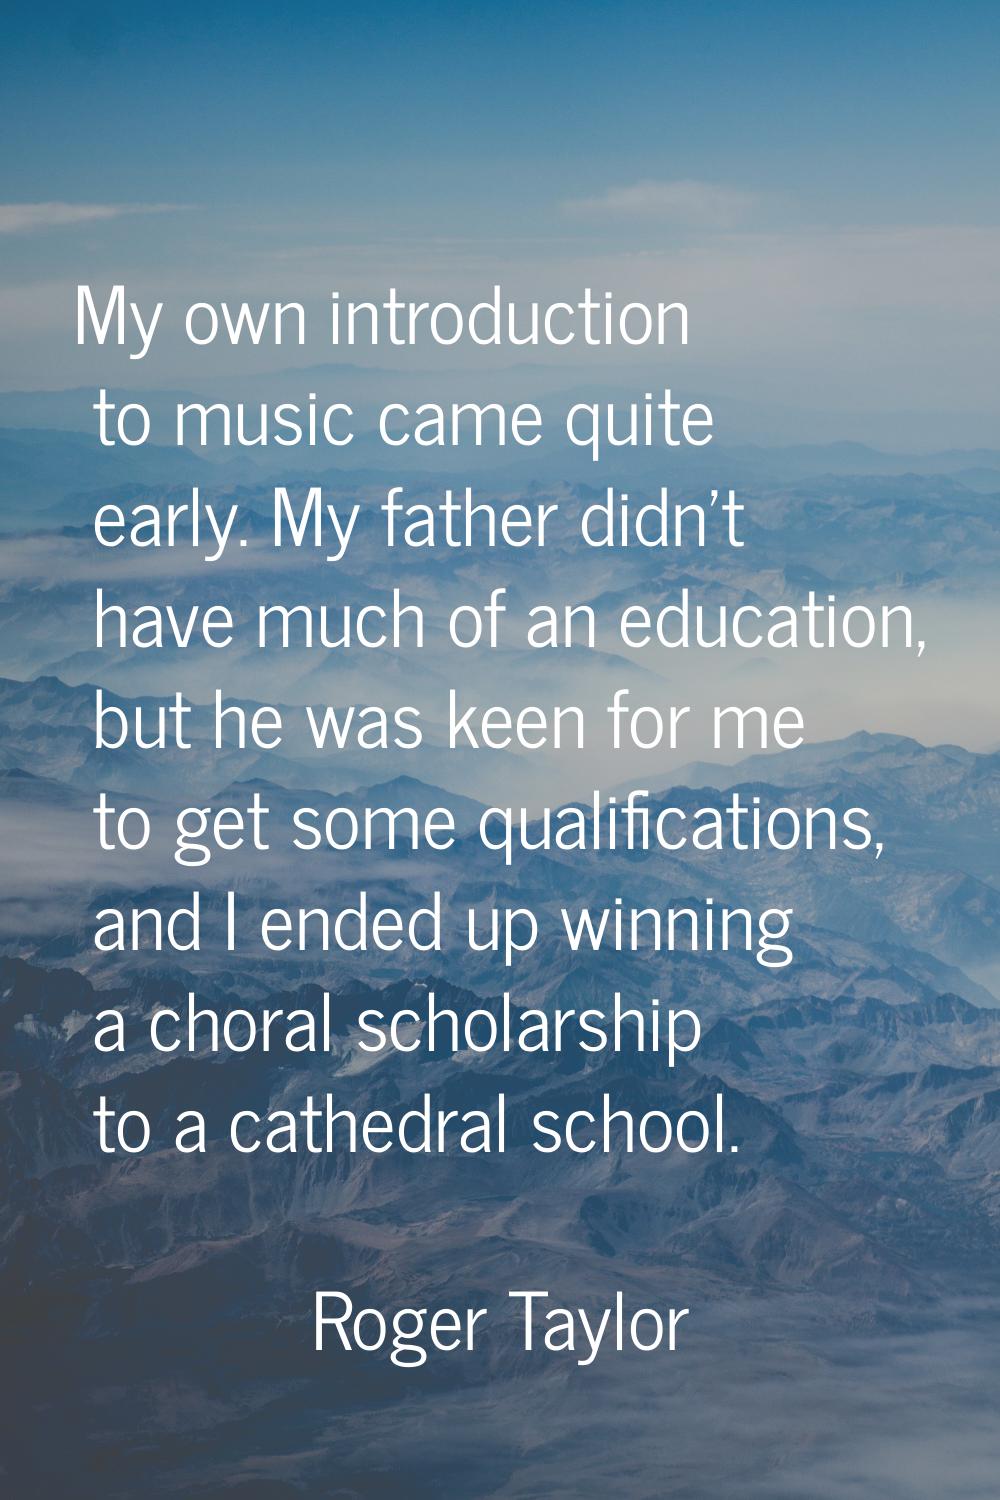 My own introduction to music came quite early. My father didn't have much of an education, but he w